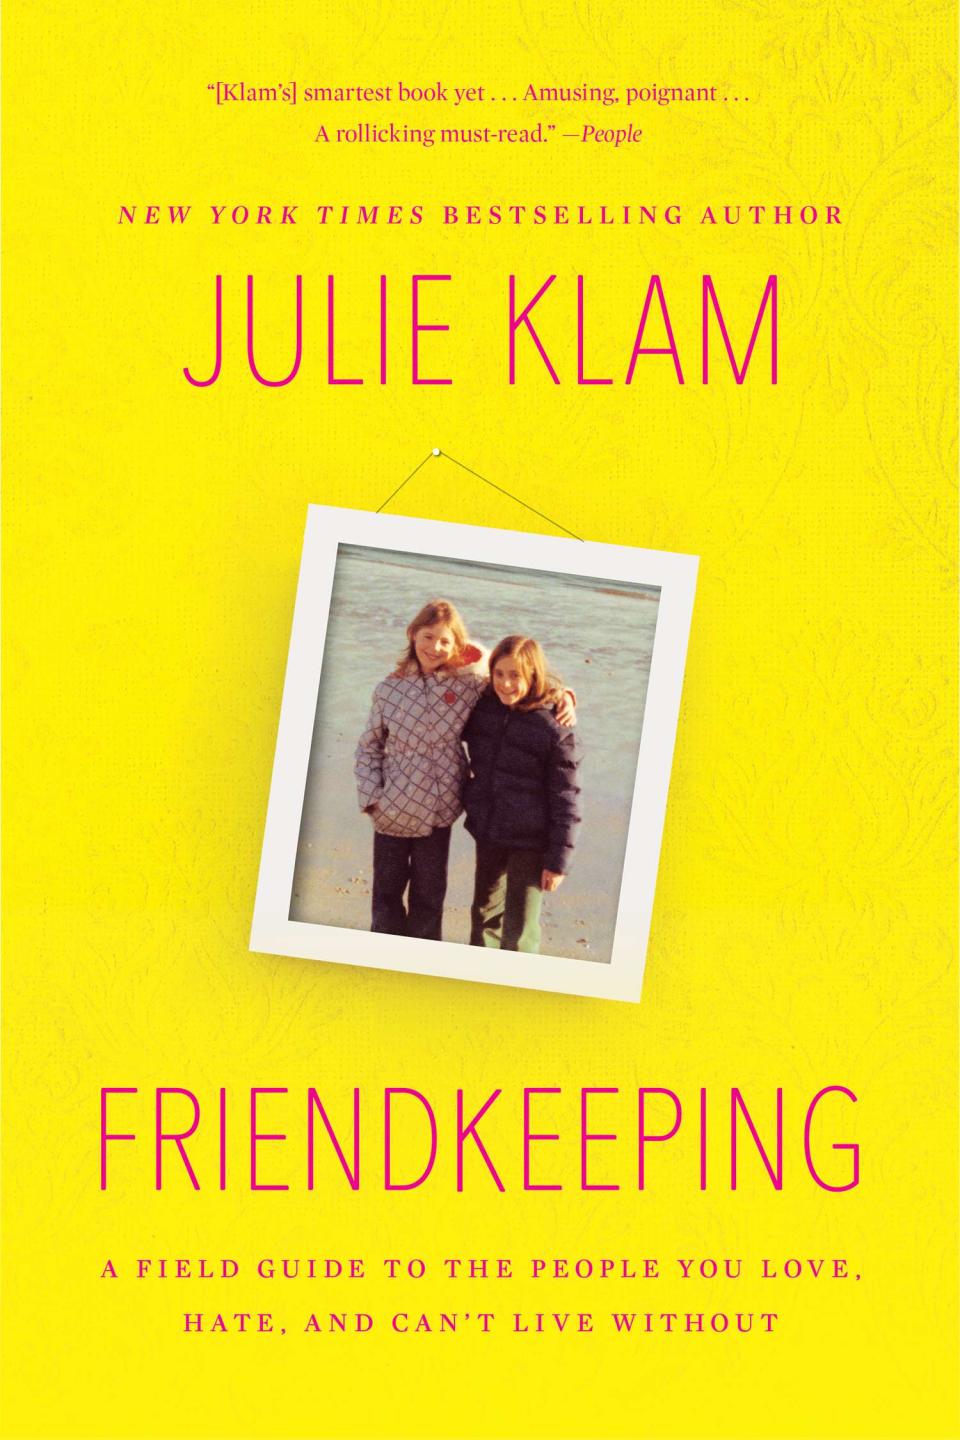 This book cover image released by Riverhead shows "Friendkeeping: A Field Guide to the People You Love, Hate, and Can't Live Without," by Julie Klam. With the holidays comes togetherness, sometimes thrust upon us. And with togetherness, especially the obligatory kind, comes major stress _ for you and your kids. But friction over the offspring of loved ones strikes all year round, leading the grown-ups to ponder whether their adult relationships are worth it. Julie Klam, a Manhattan mom and author of the new book "Friendkeeping," believes middle ground is possible. (AP Photo/Riverhead)